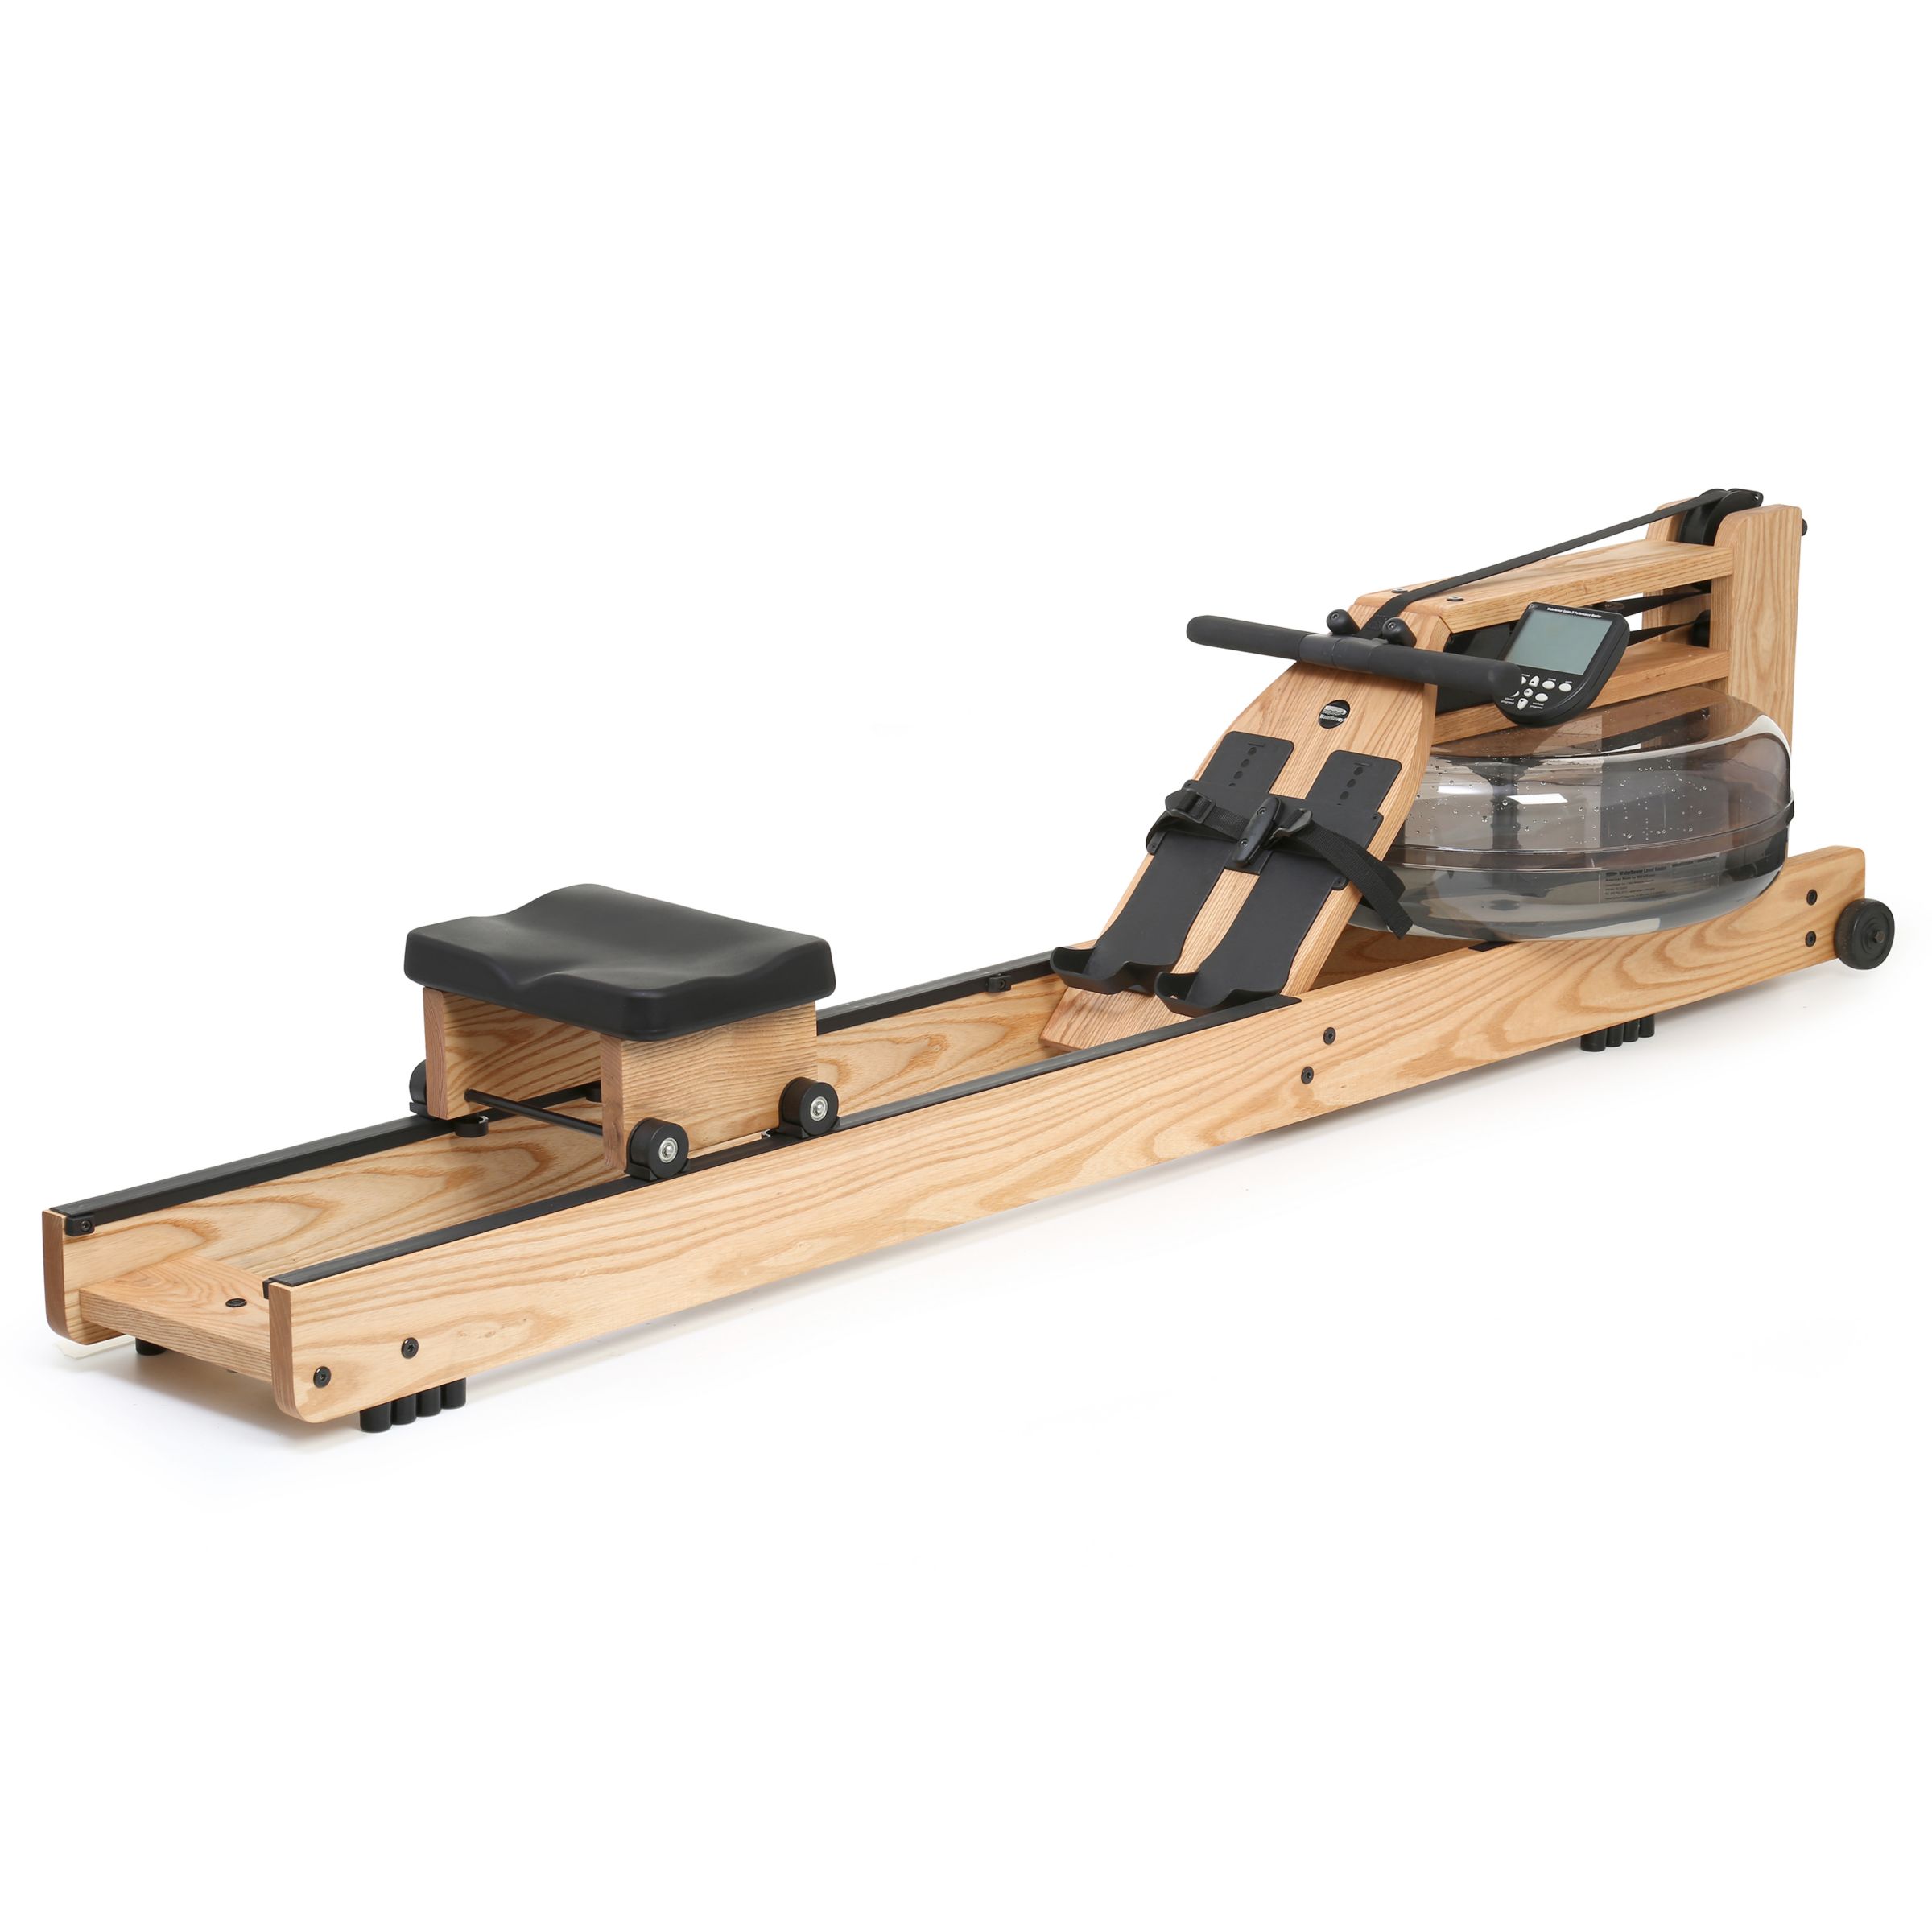 WaterRower Natural Rowing Machine with S4 Performance Monitor at John Lewis